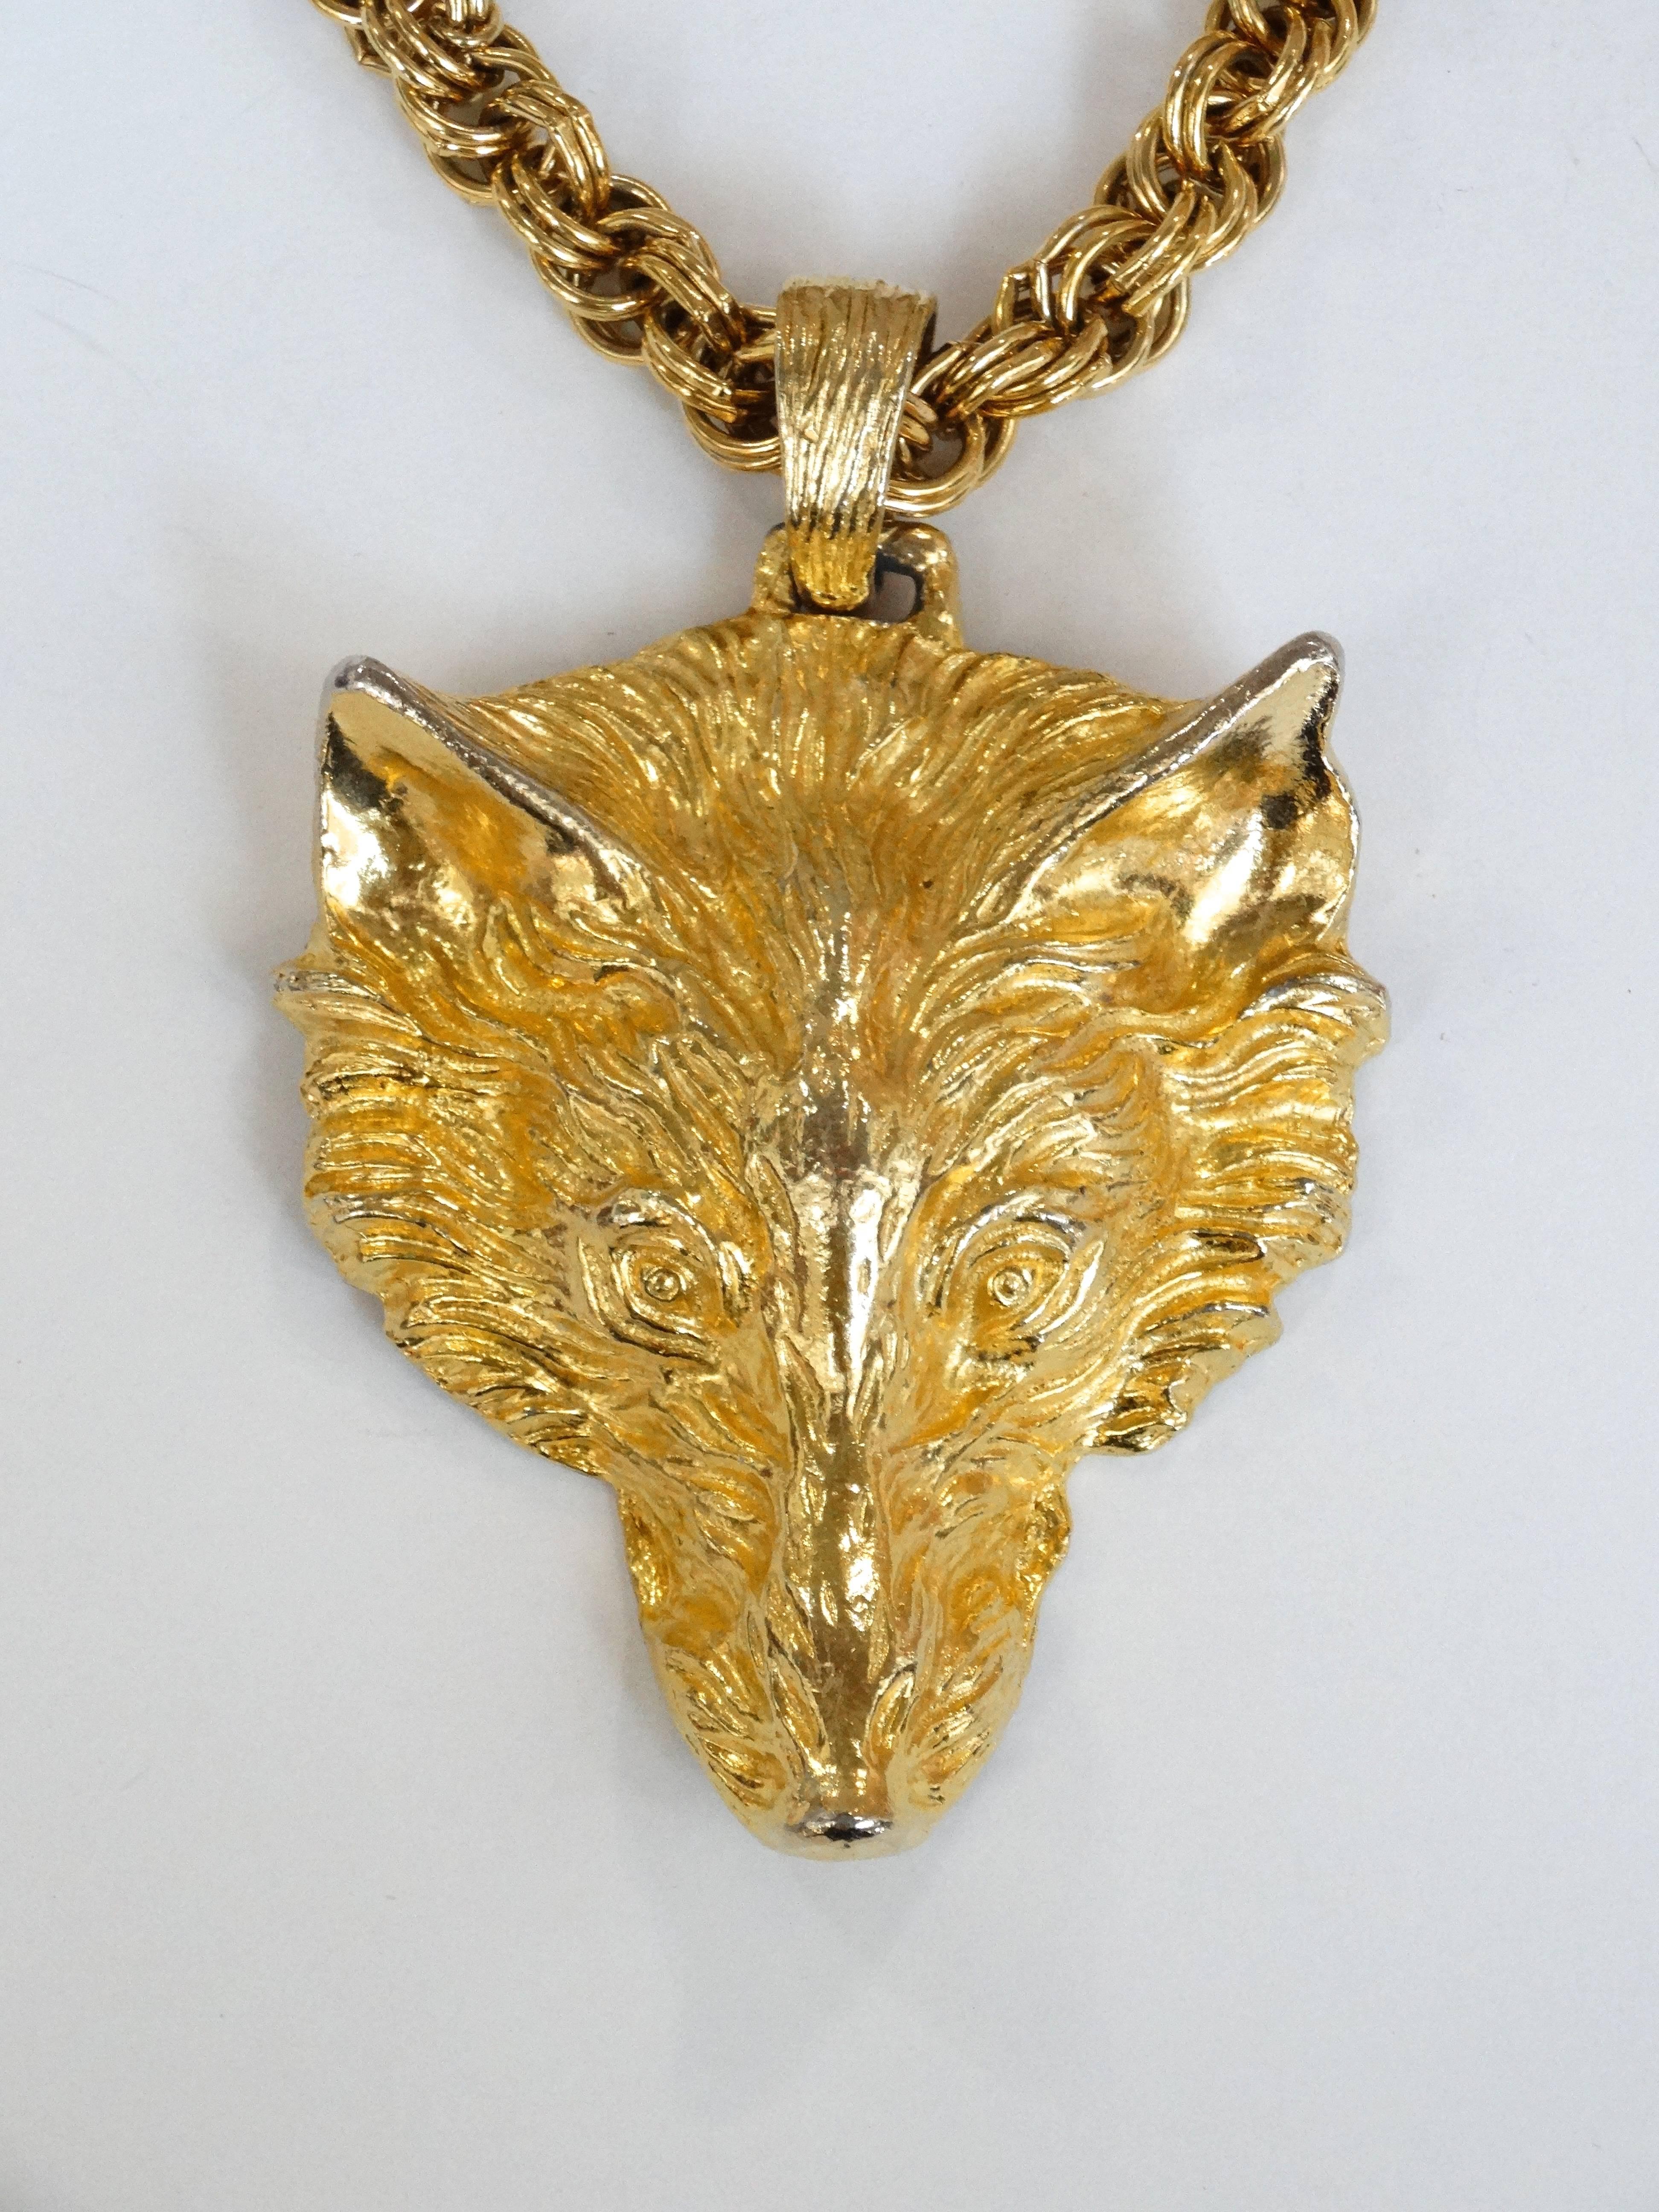 The most amazing 1960s fox pendant! Intricately detailed oversized fox head pendant with woven braided gold chain. Unsigned but clearly of designer quality, heavy weight gold toned metal. 

Width: 2.5 in 
Length: 4 in
Chain length: 16 in